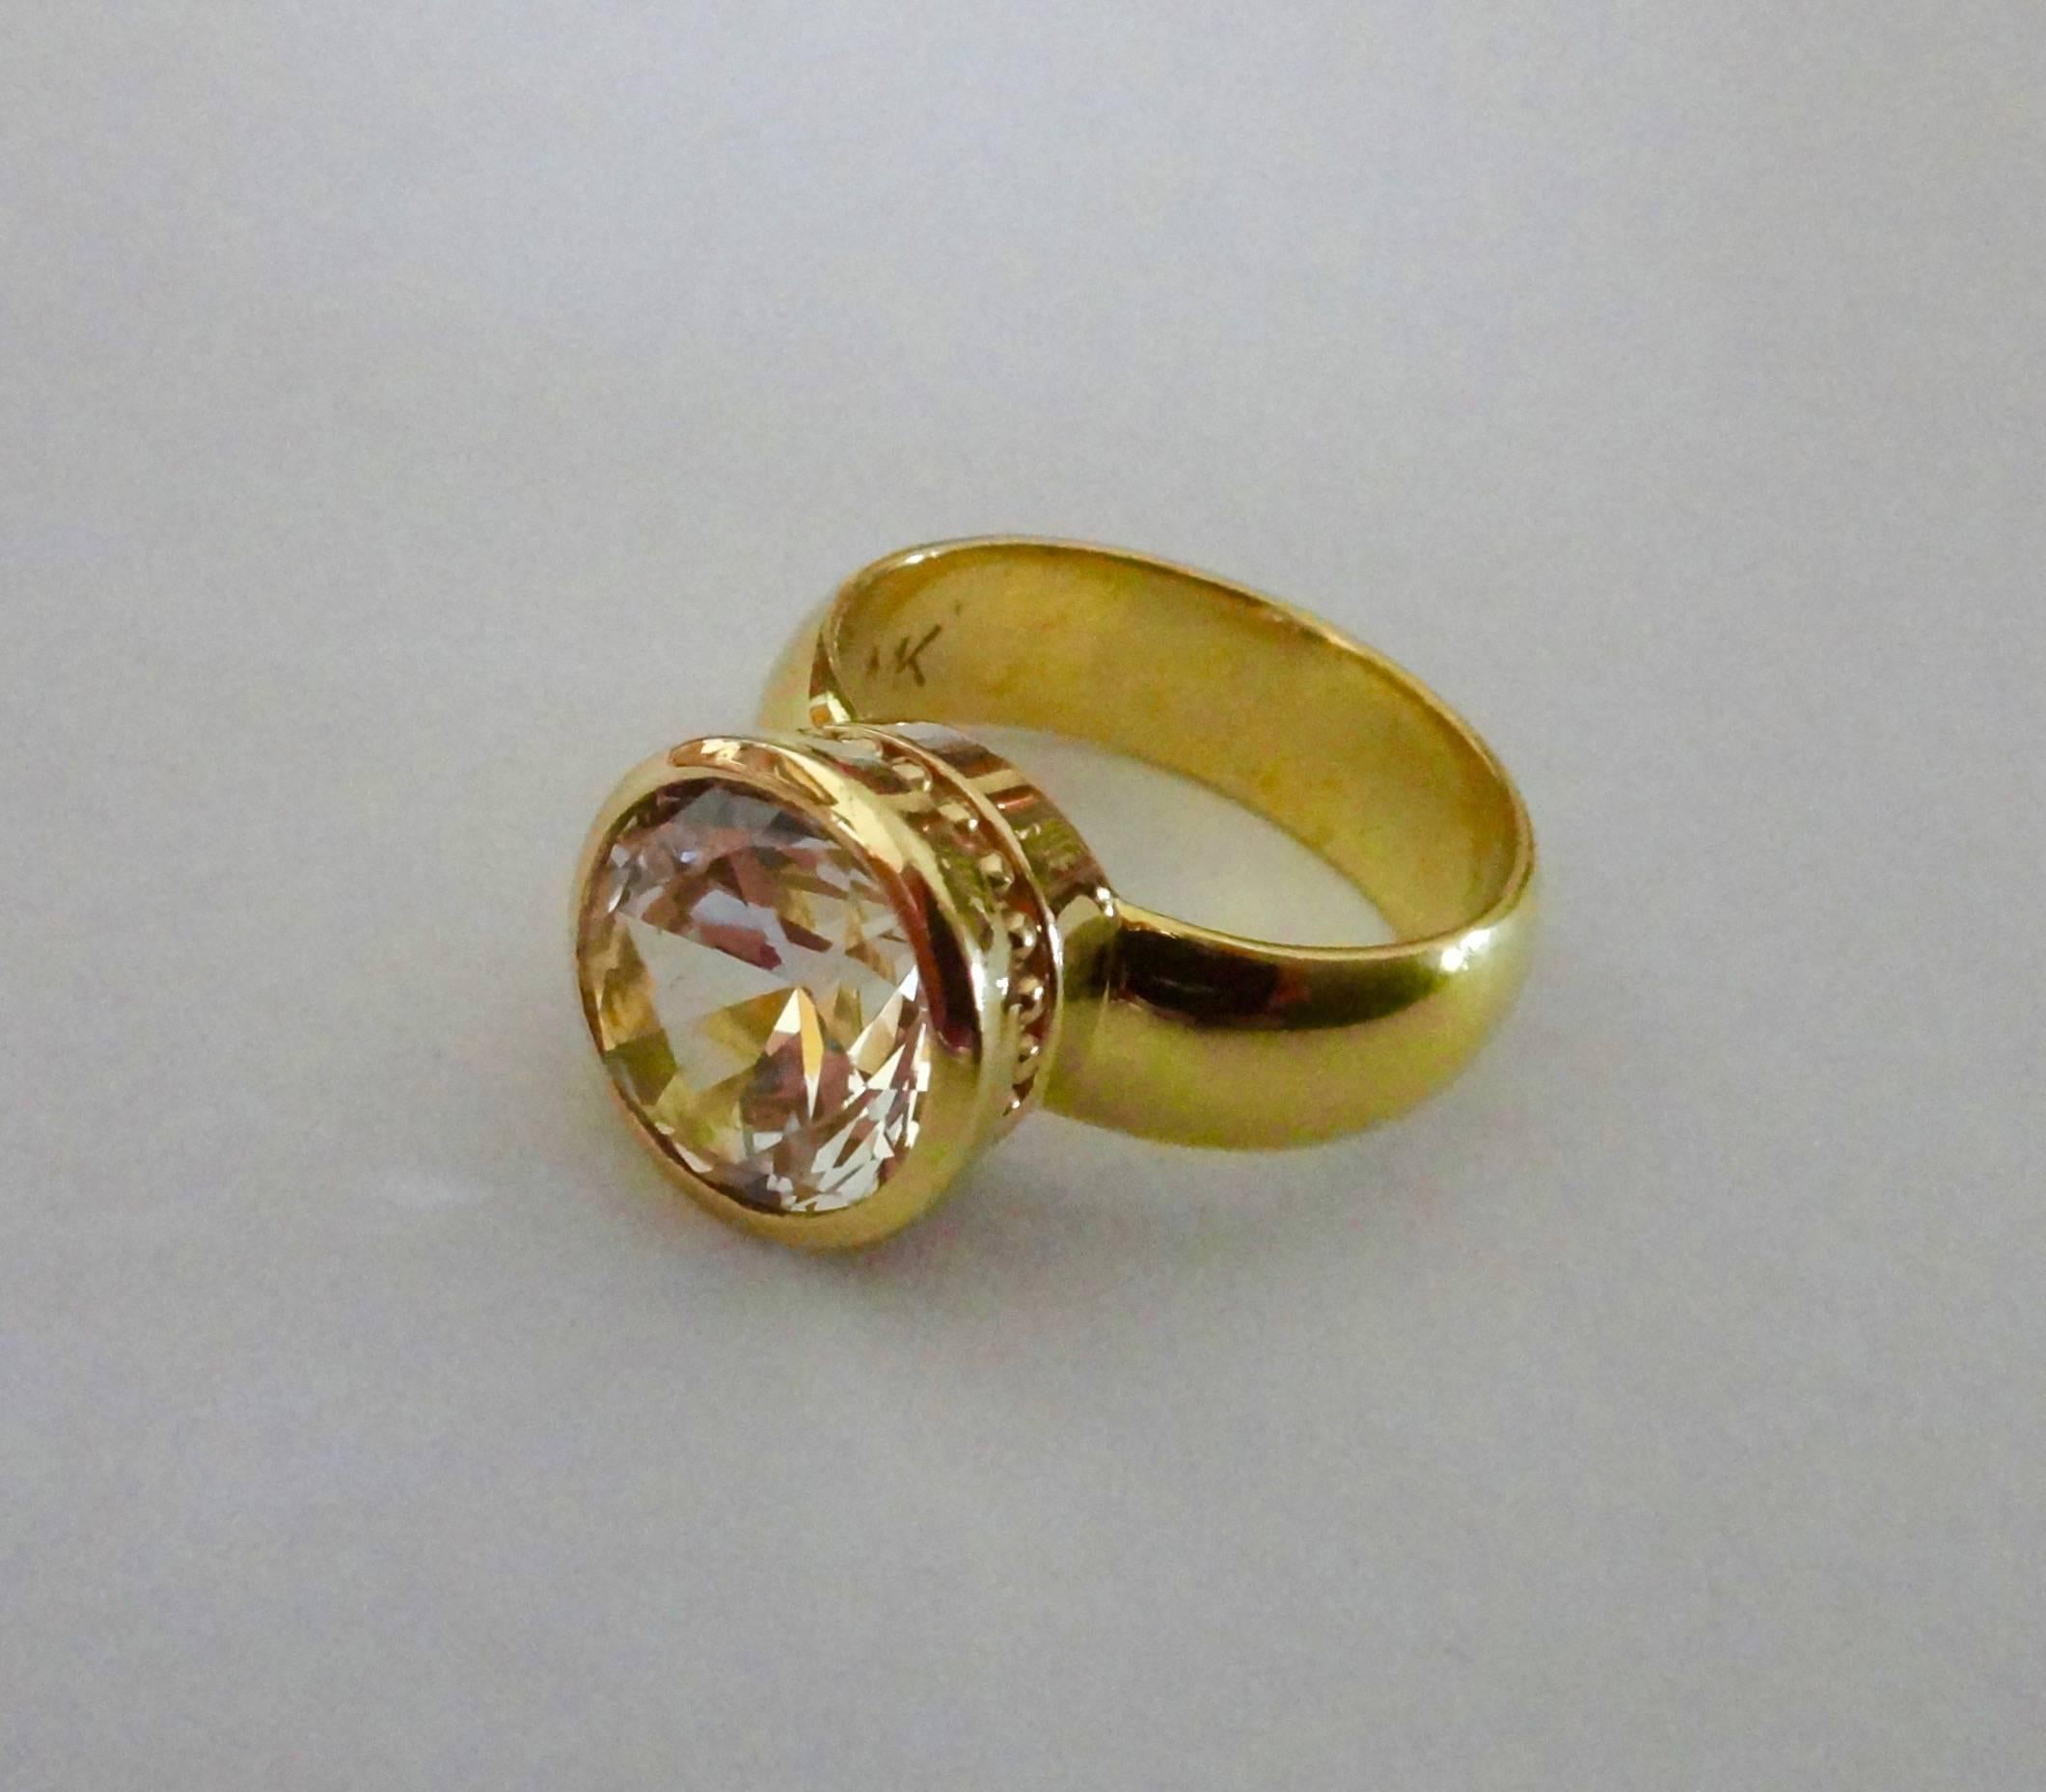 A 10mm round cut white sapphire is bezel set in an 18k yellow gold "Leah" ring.  Beaded detail around the bezel adds interest.  The ring looks beautiful alone or may be stacked with other Michael K. Jewels "Leah" rings for some